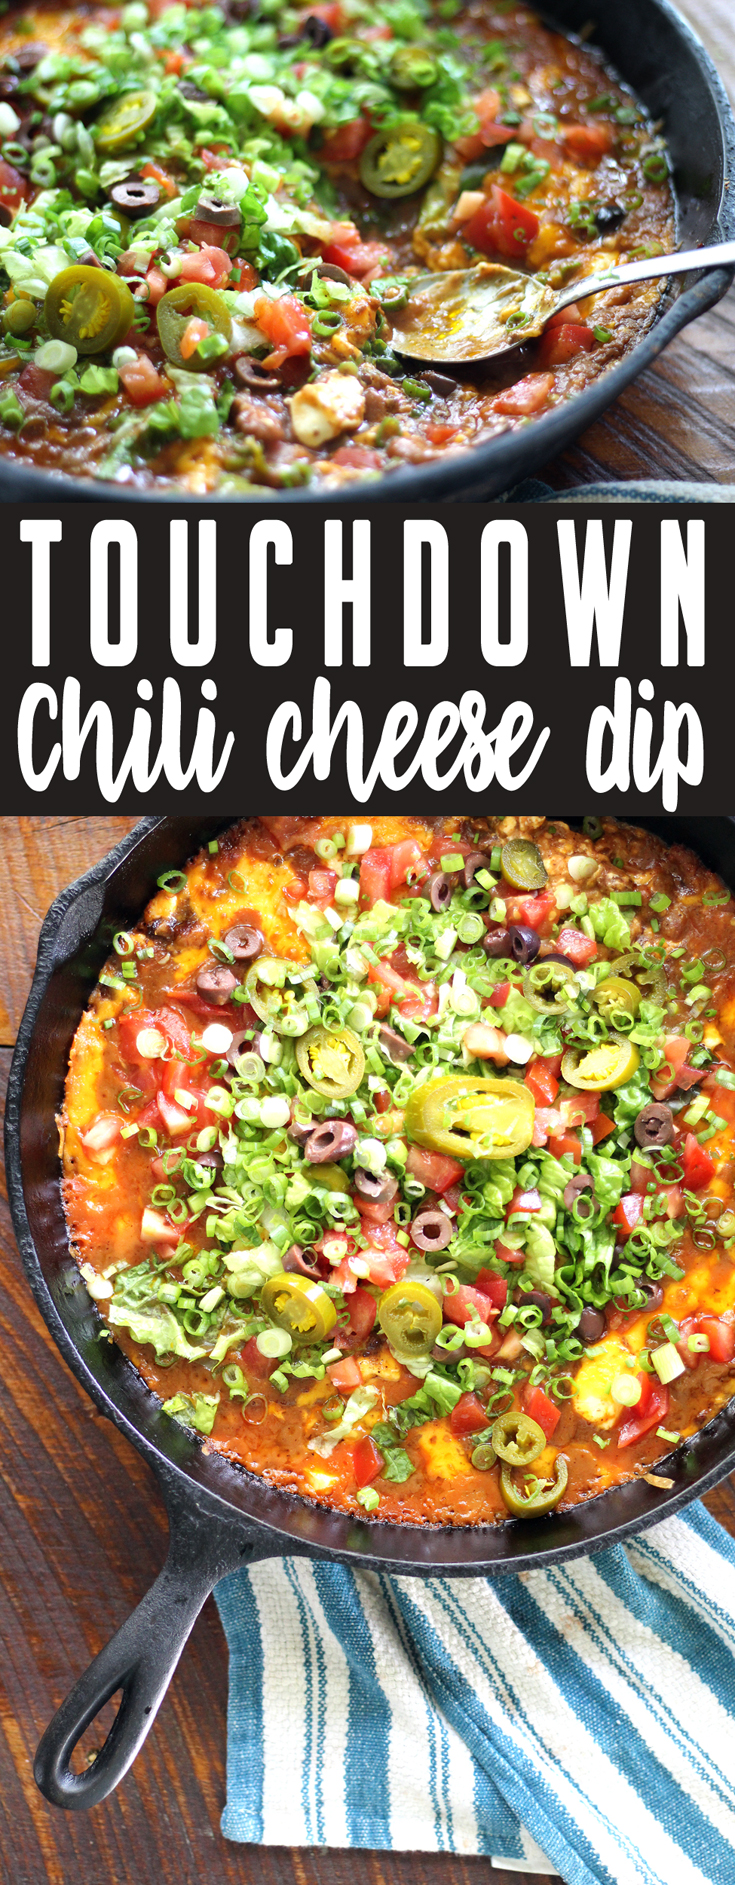 Are you ready for some football? This Touchdown Chili Cheese Dip recipe will make the crowd go wild! Layers of beans, chili, cheese, and more flavor-packed surprises will be a hit at your next tailgate party.